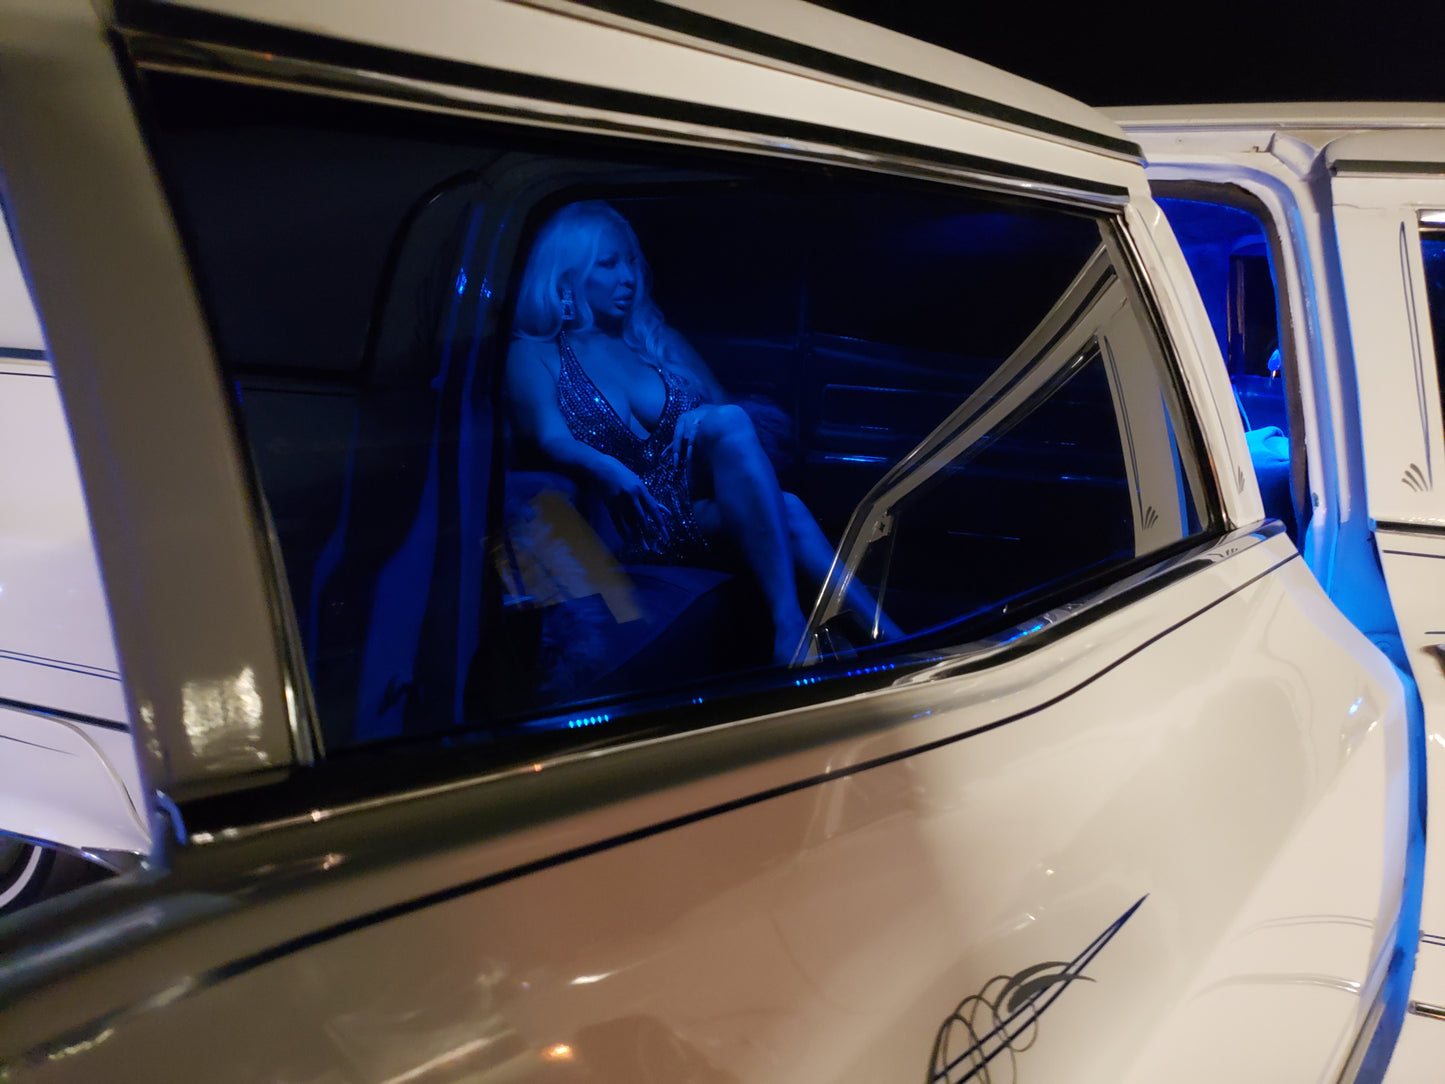 Tickets to Backstage Vintage Limo Photoshoot at Liberace Garage